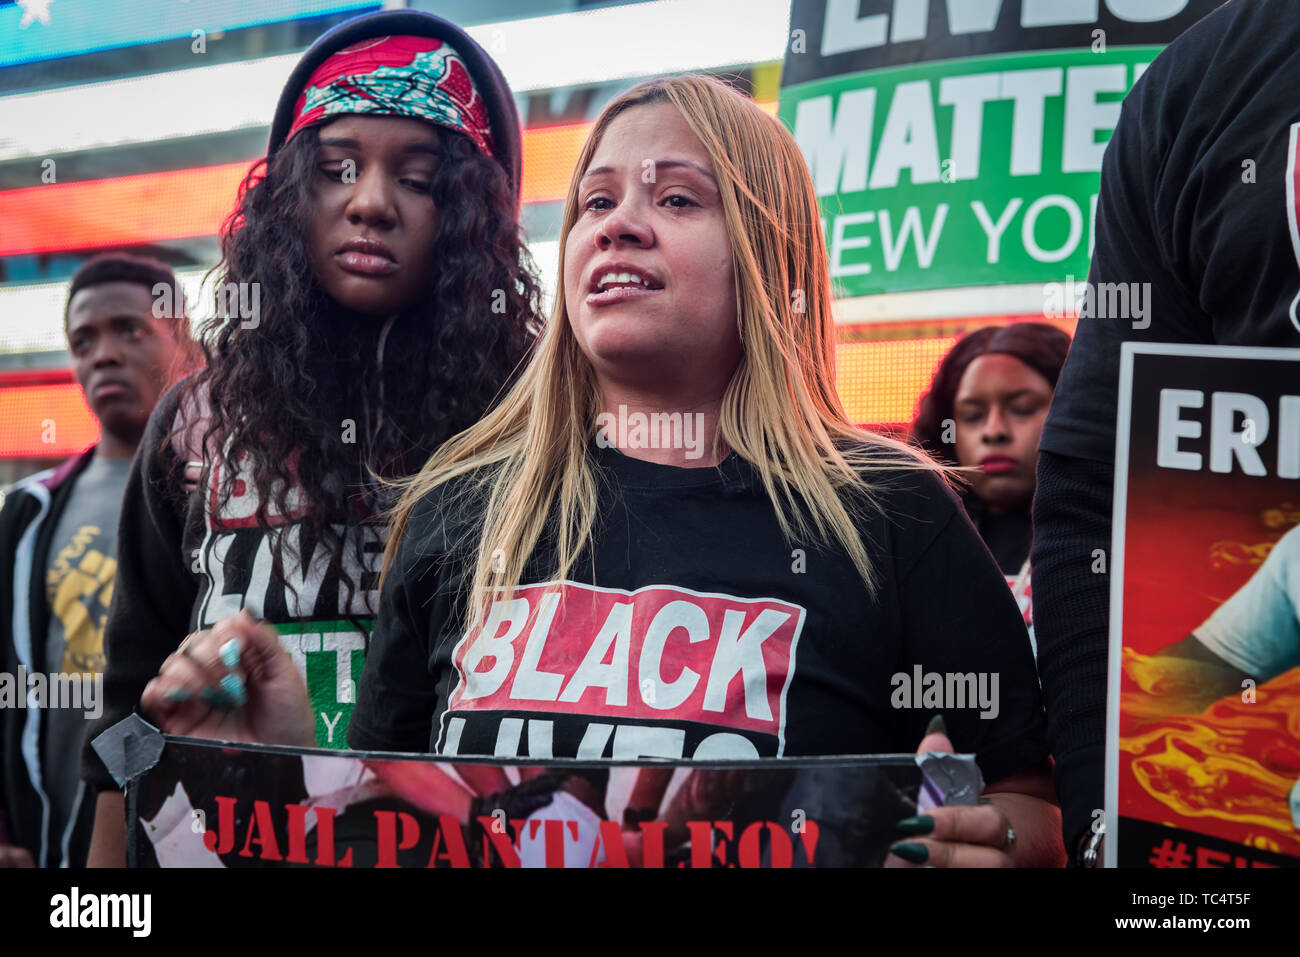 Angelique Negroni-Kearse, wife of Andrew Kearse, who died in police custody after he was chocked by police in 2017. - On June 4, 2019, protesters rallied in Times Square in New York City demanding the firing of Officer Pantaleo for the choking death of Eric Garner in 2014. Daniel Pantaleo is currently standing administrative trial which began on May 13. On May 21, the judge overseeing his case delayed the remainder of the hearing until June 5, 2019. Pantaleo has been on desk duty since Eric Garner's death and could face penalties ranging from loss of vacation days to firing from the NYPD. Stock Photo